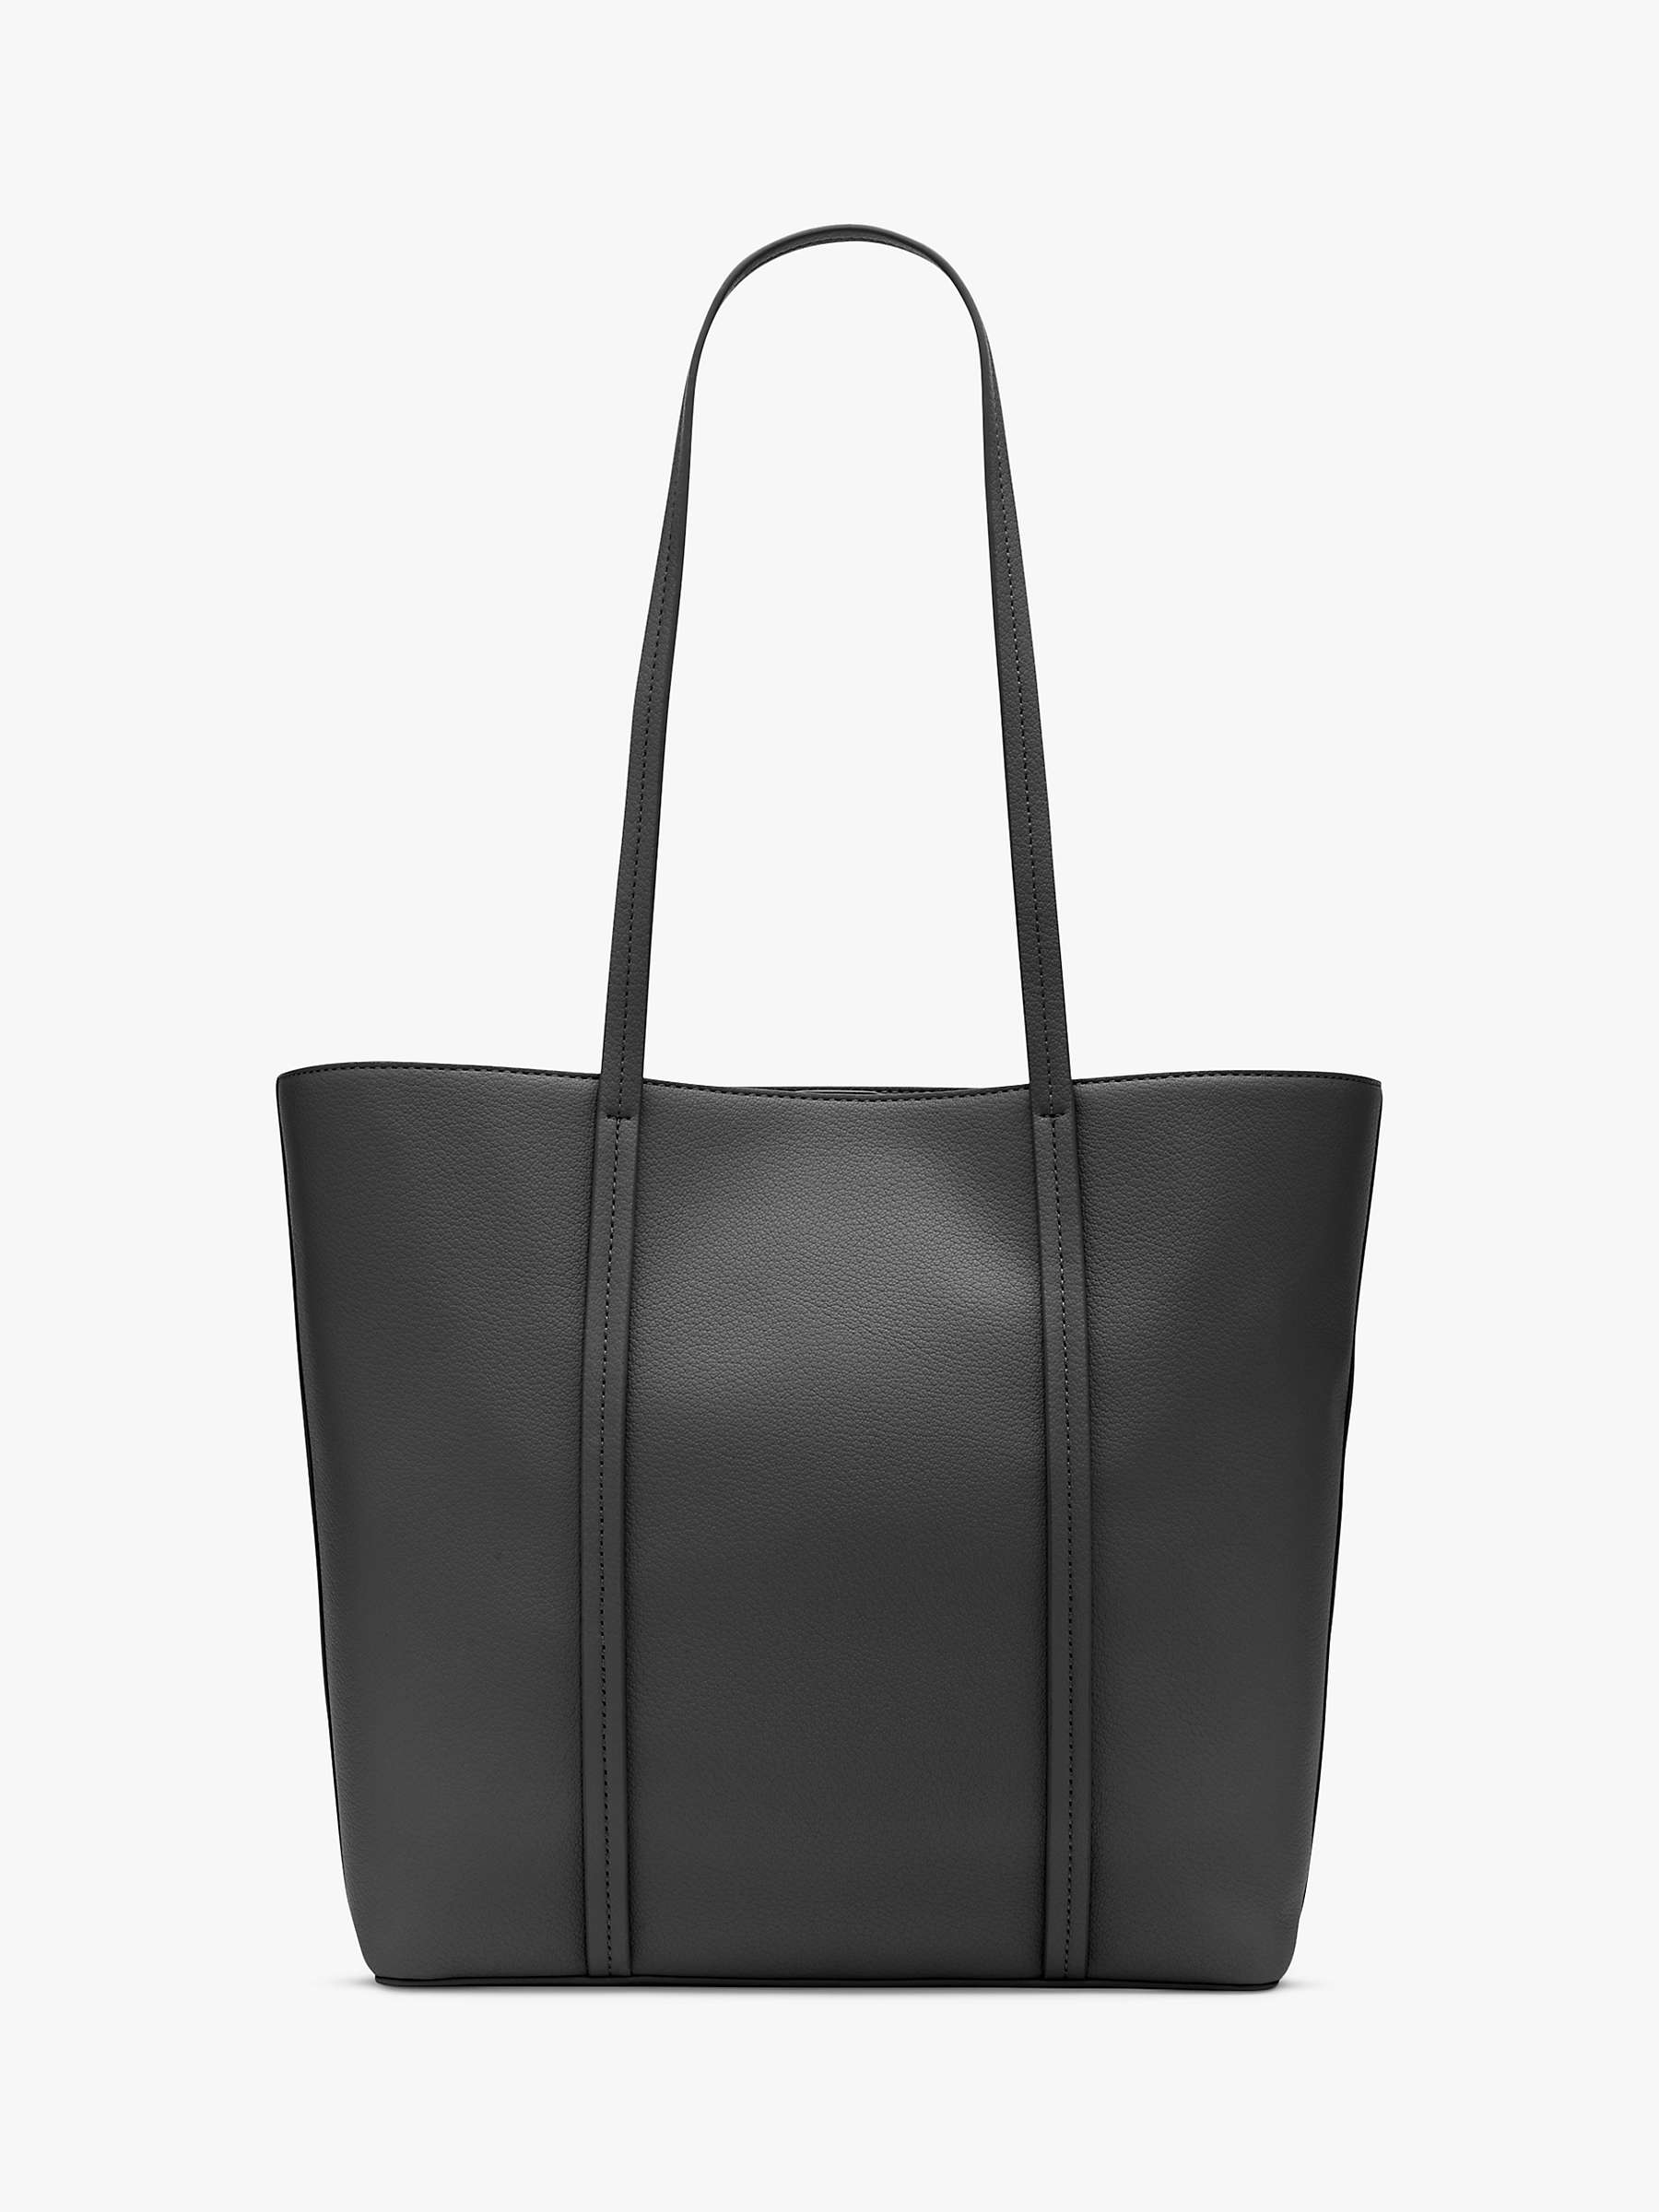 Buy DKNY 7TH Avenue East West Leather Tote Bag, Black Online at johnlewis.com